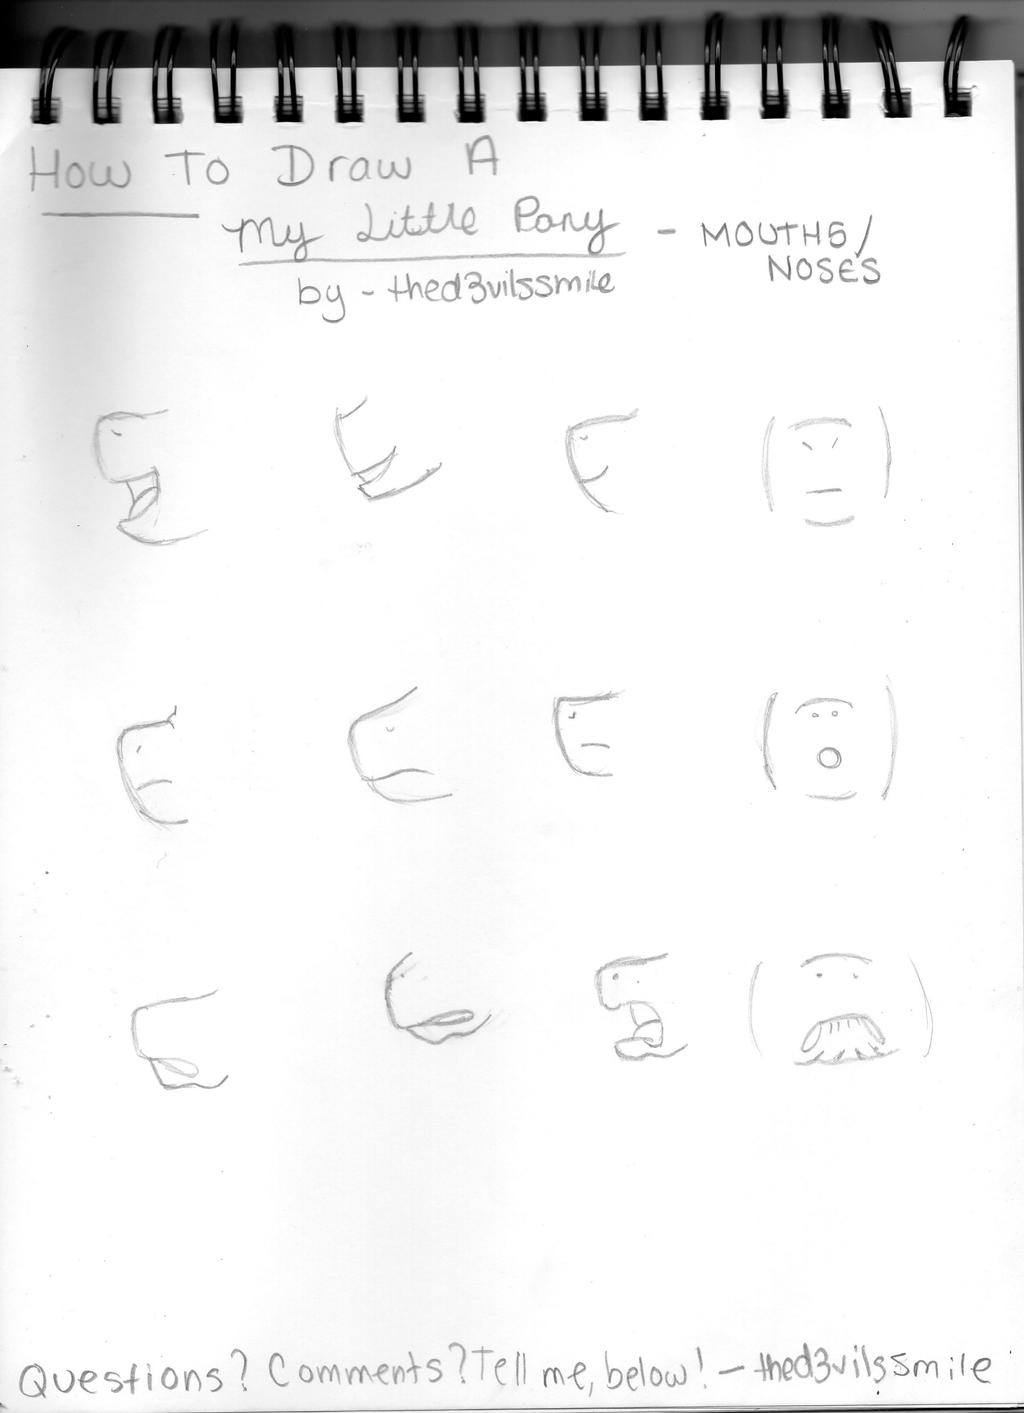 How To Draw A My Little Pony - Mouths And Noses